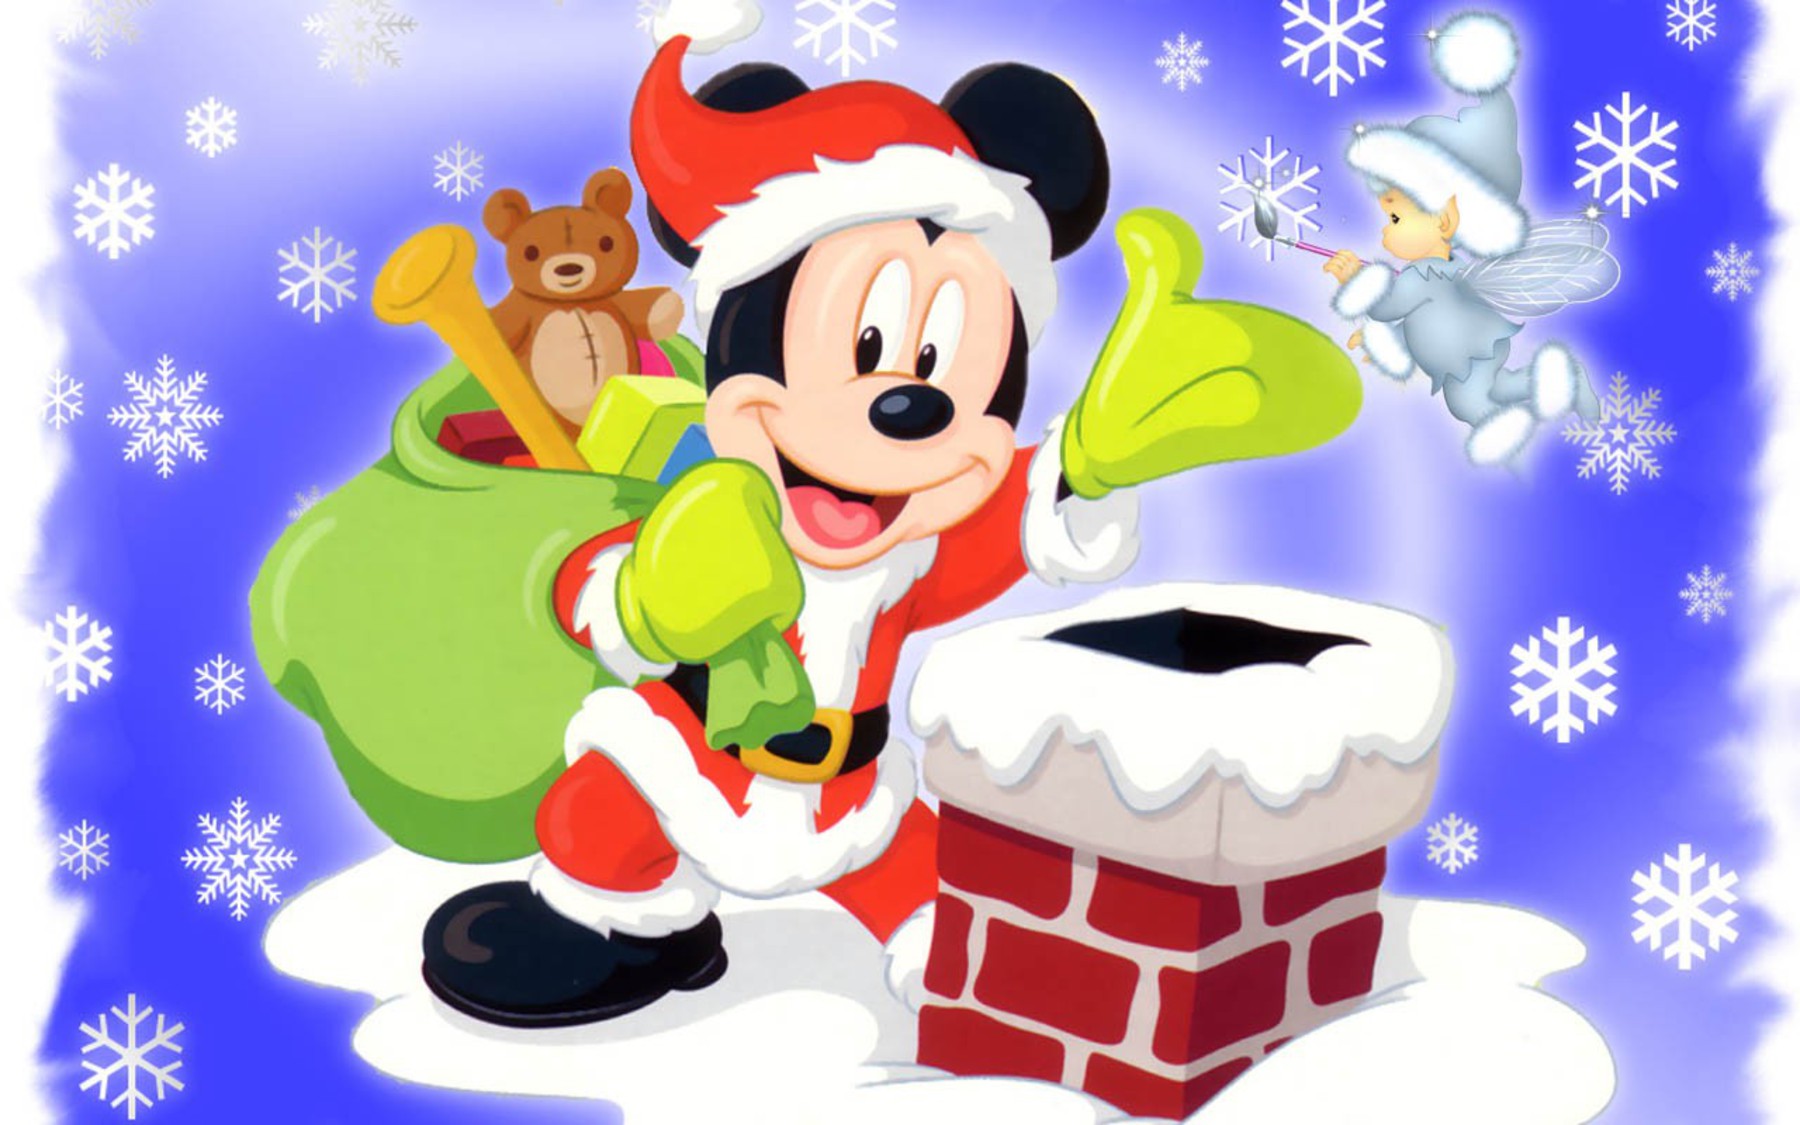 Cute christmas wallpapers free